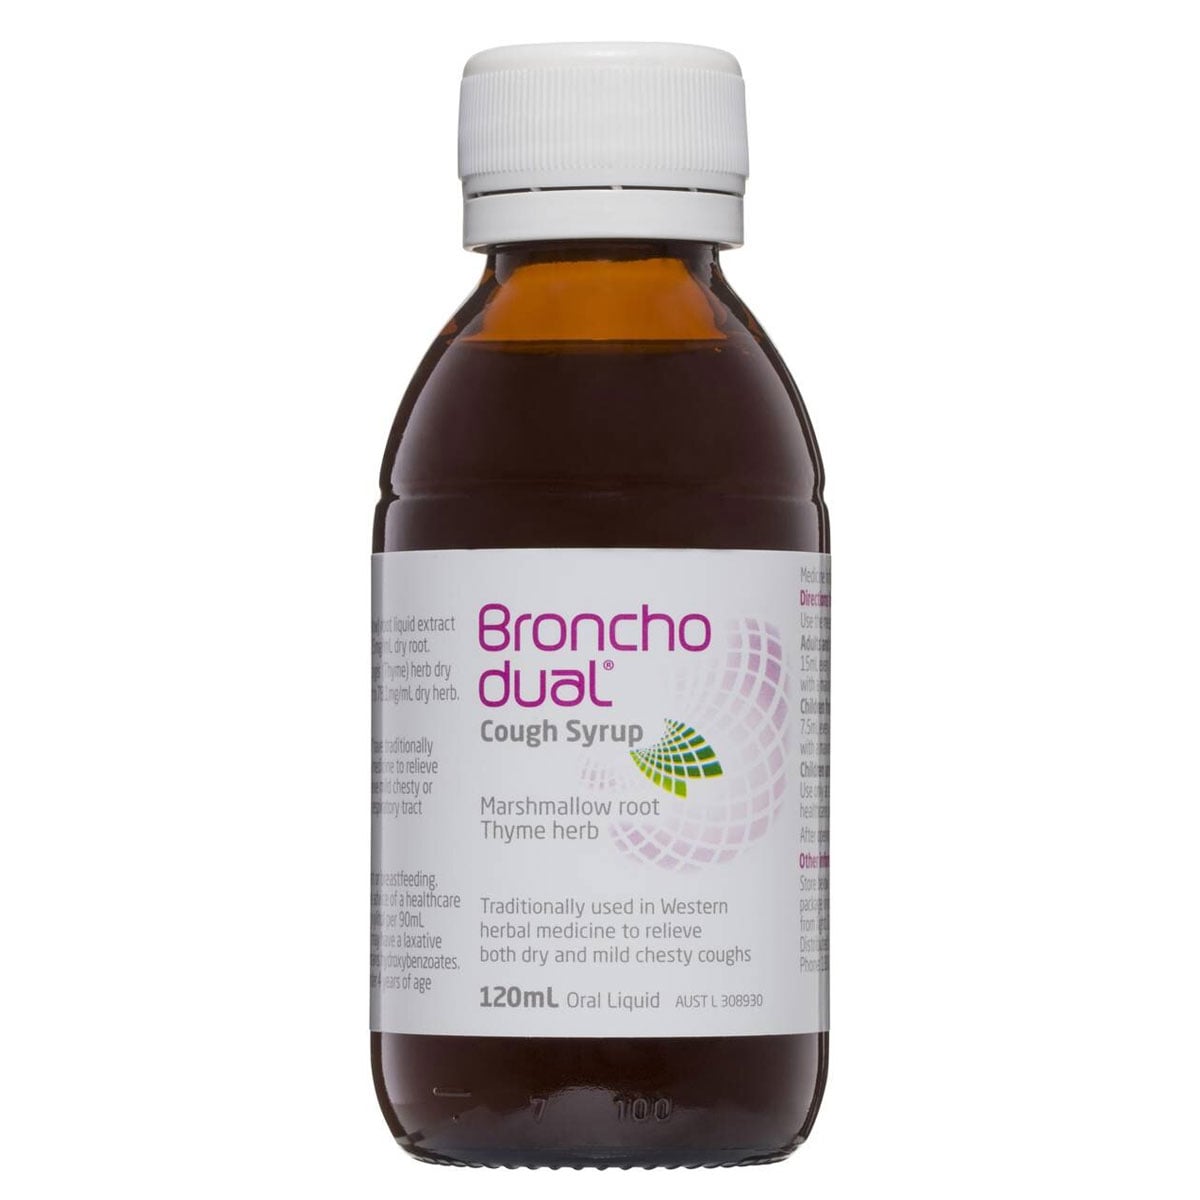 Bronchodual Cough Syrup Dual Action 200mL